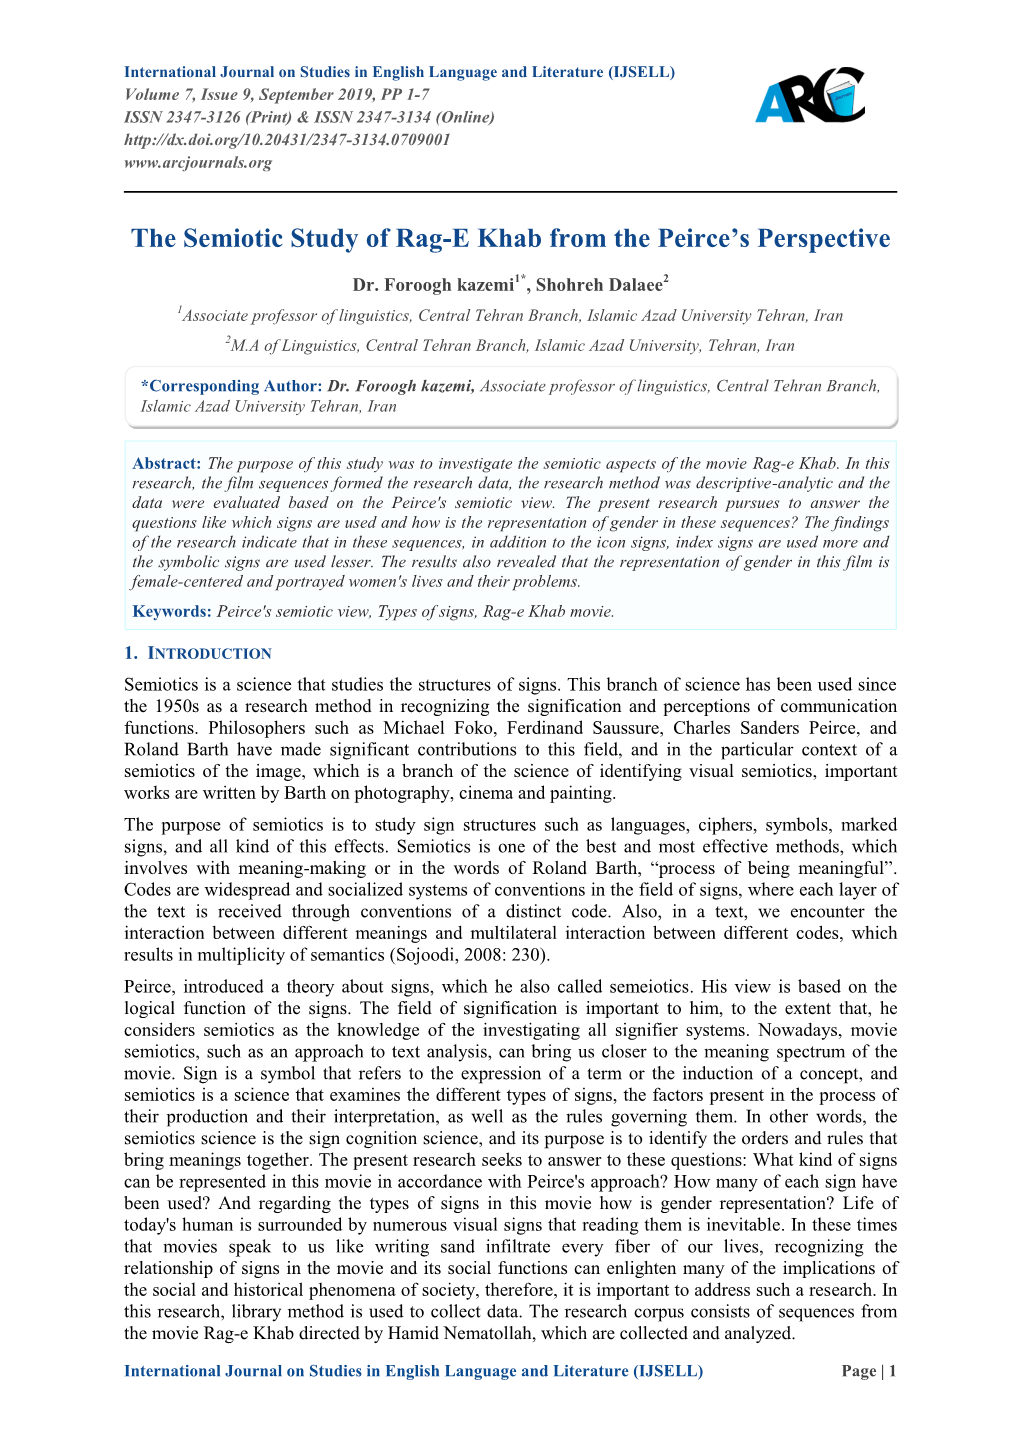 The Semiotic Study of Rag-E Khab from the Peirce's Perspective